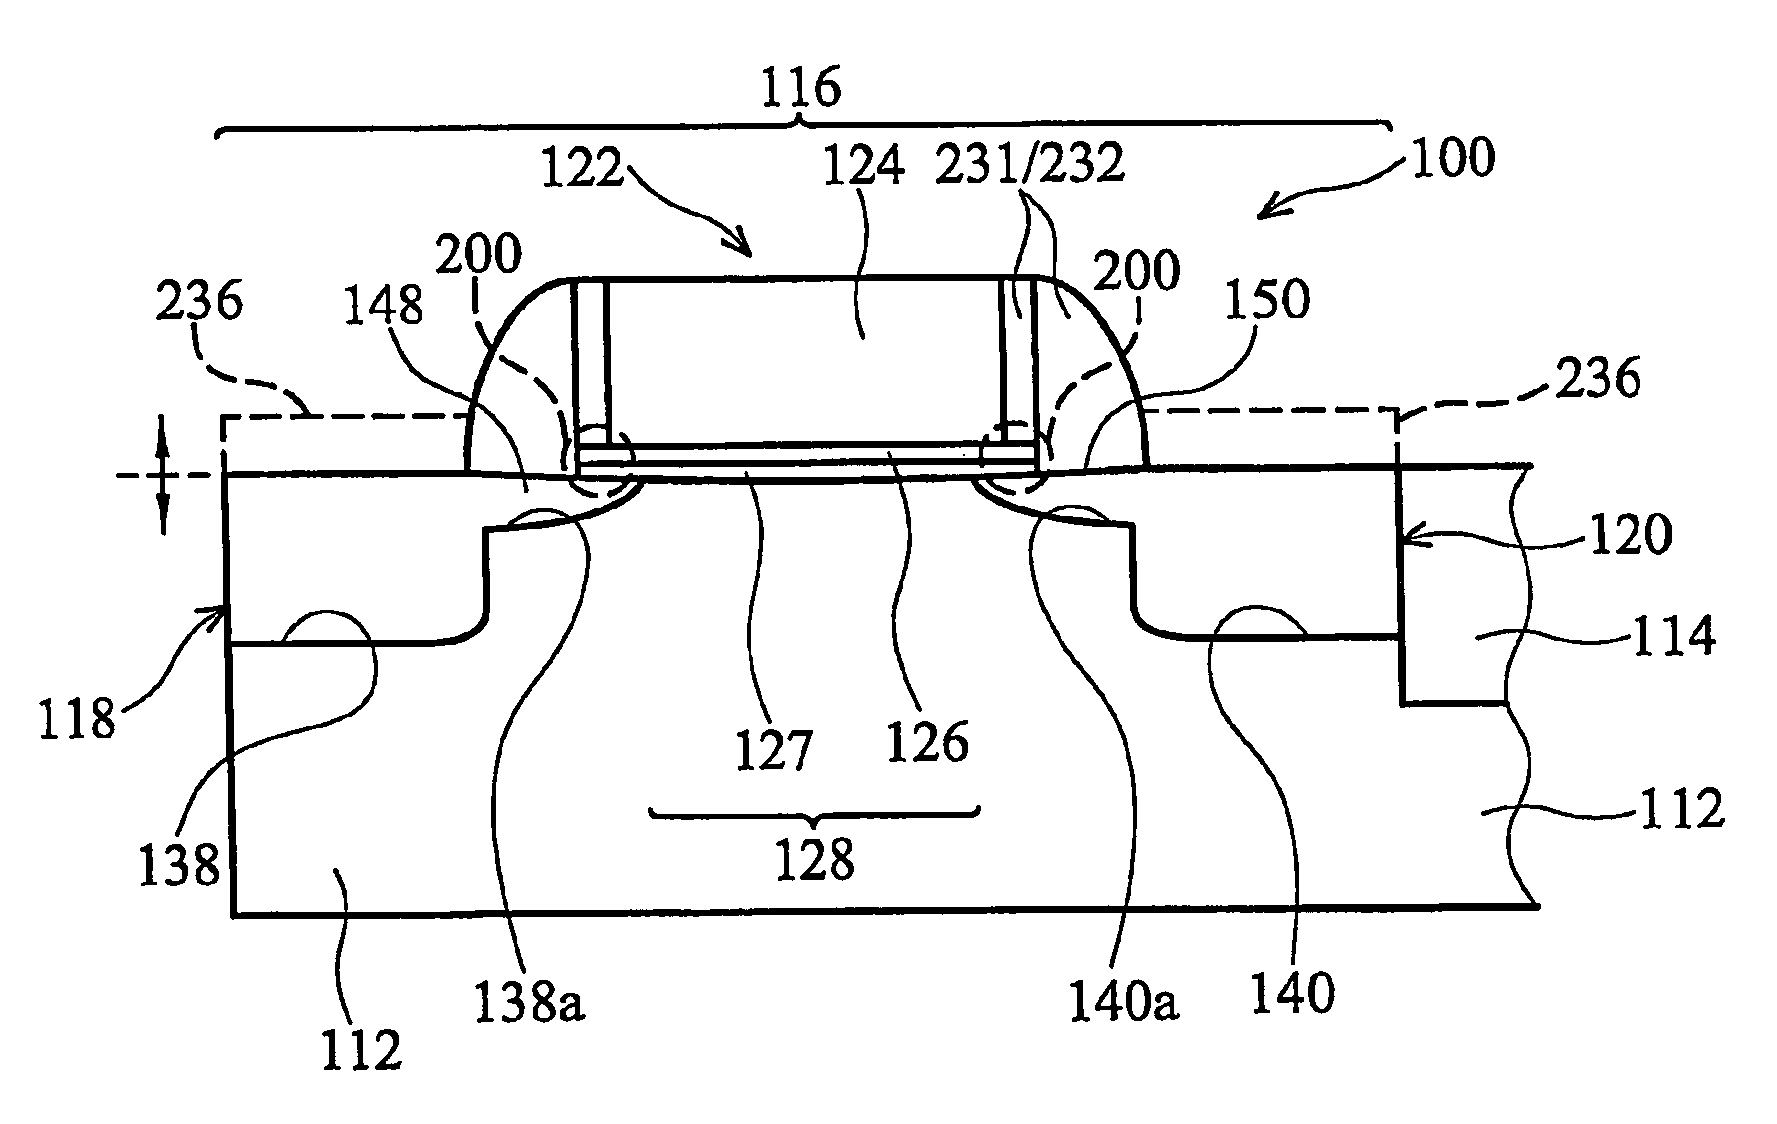 Ultra-shallow junction MOSFET having a high-k gate dielectric and in-situ doped selective epitaxy source/drain extensions and a method of making same